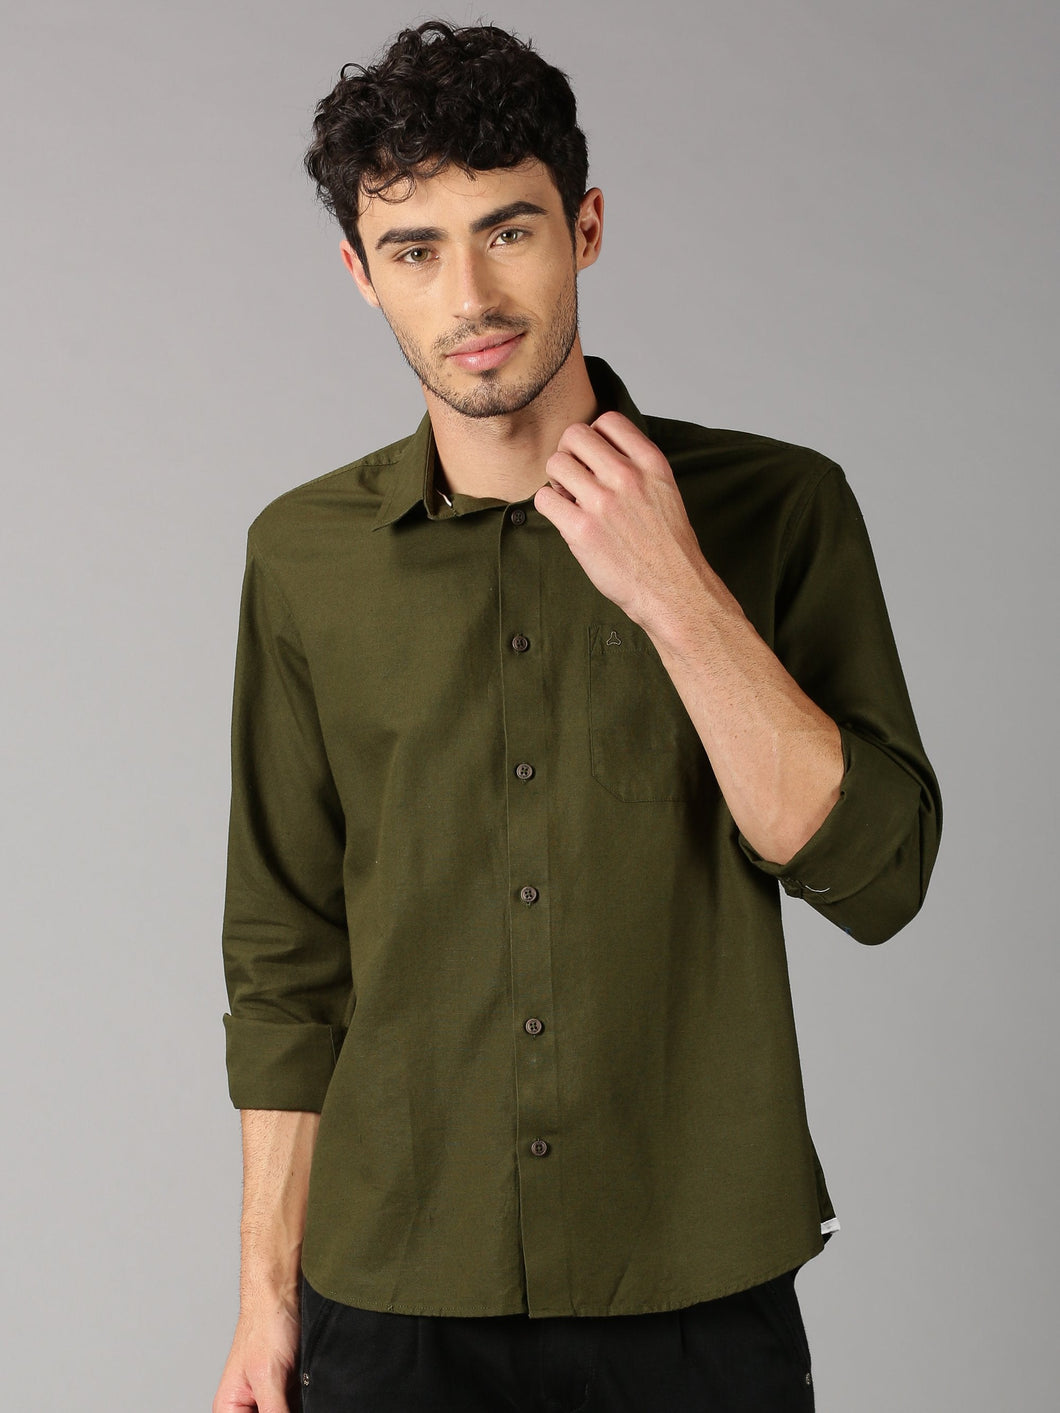 Polycotton Olive color Full Sleeve Formal shirt